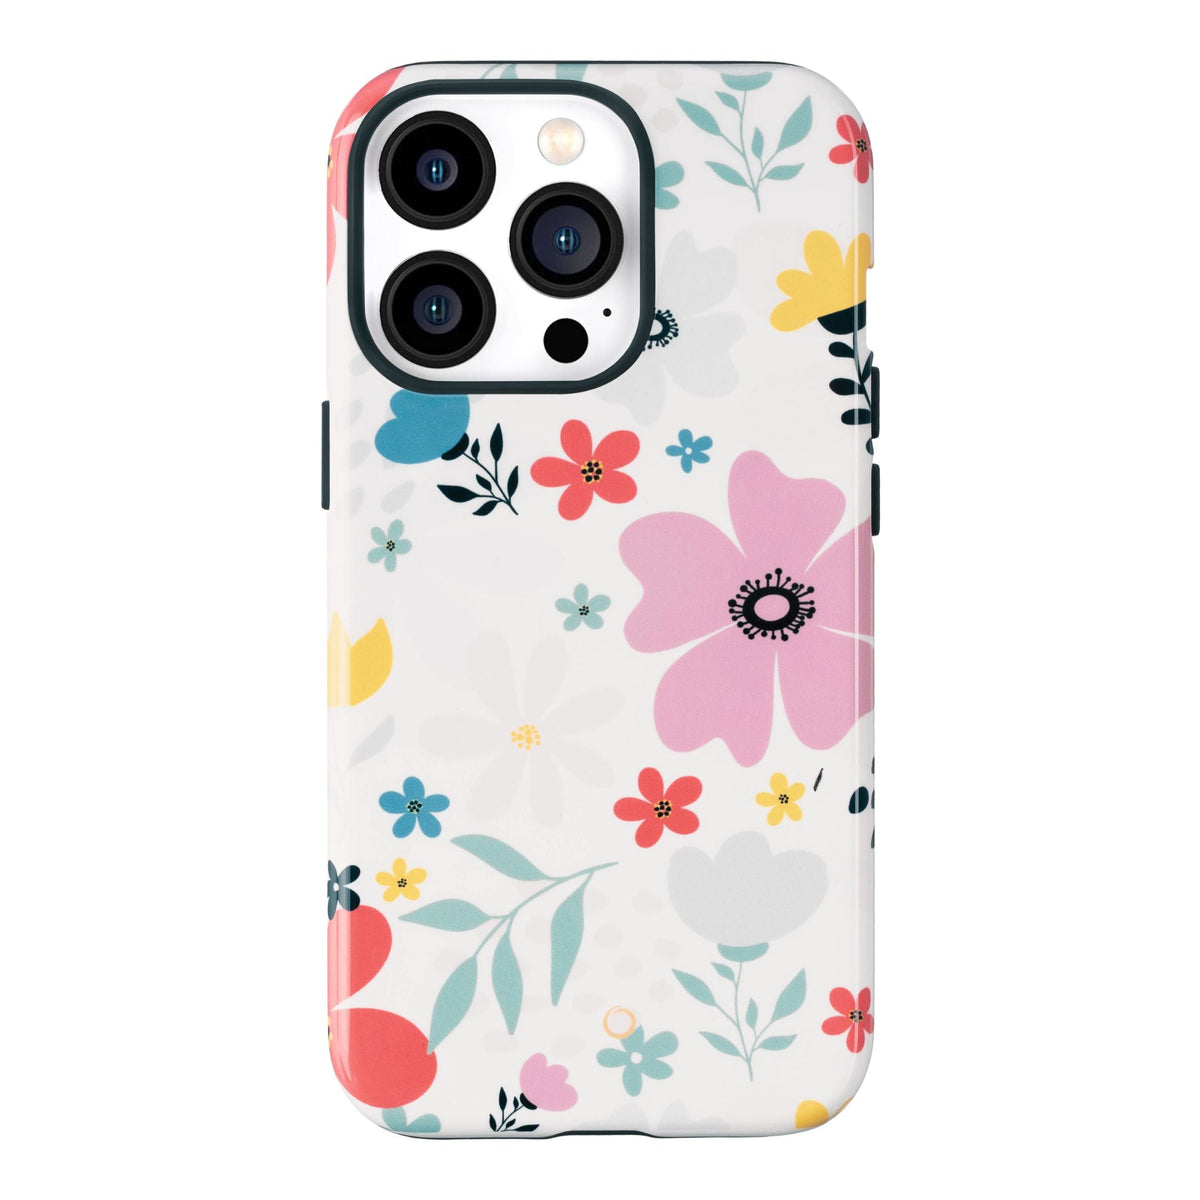 Flower Power iPhone Case - iPhone 12 Pro Max